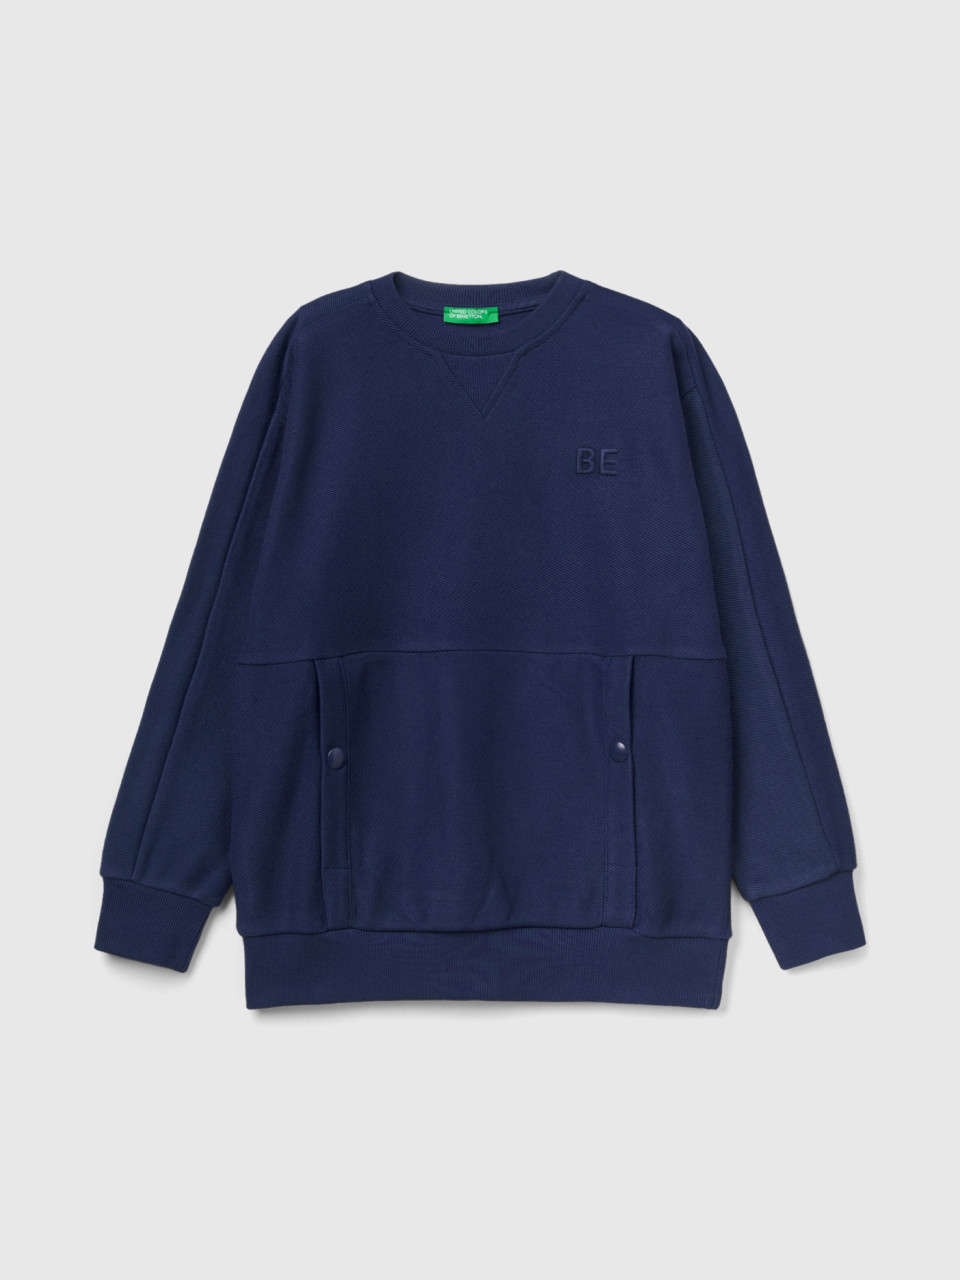 Benetton, Sweatshirt With Pockets And be Embroidery, Dark Blue, Kids